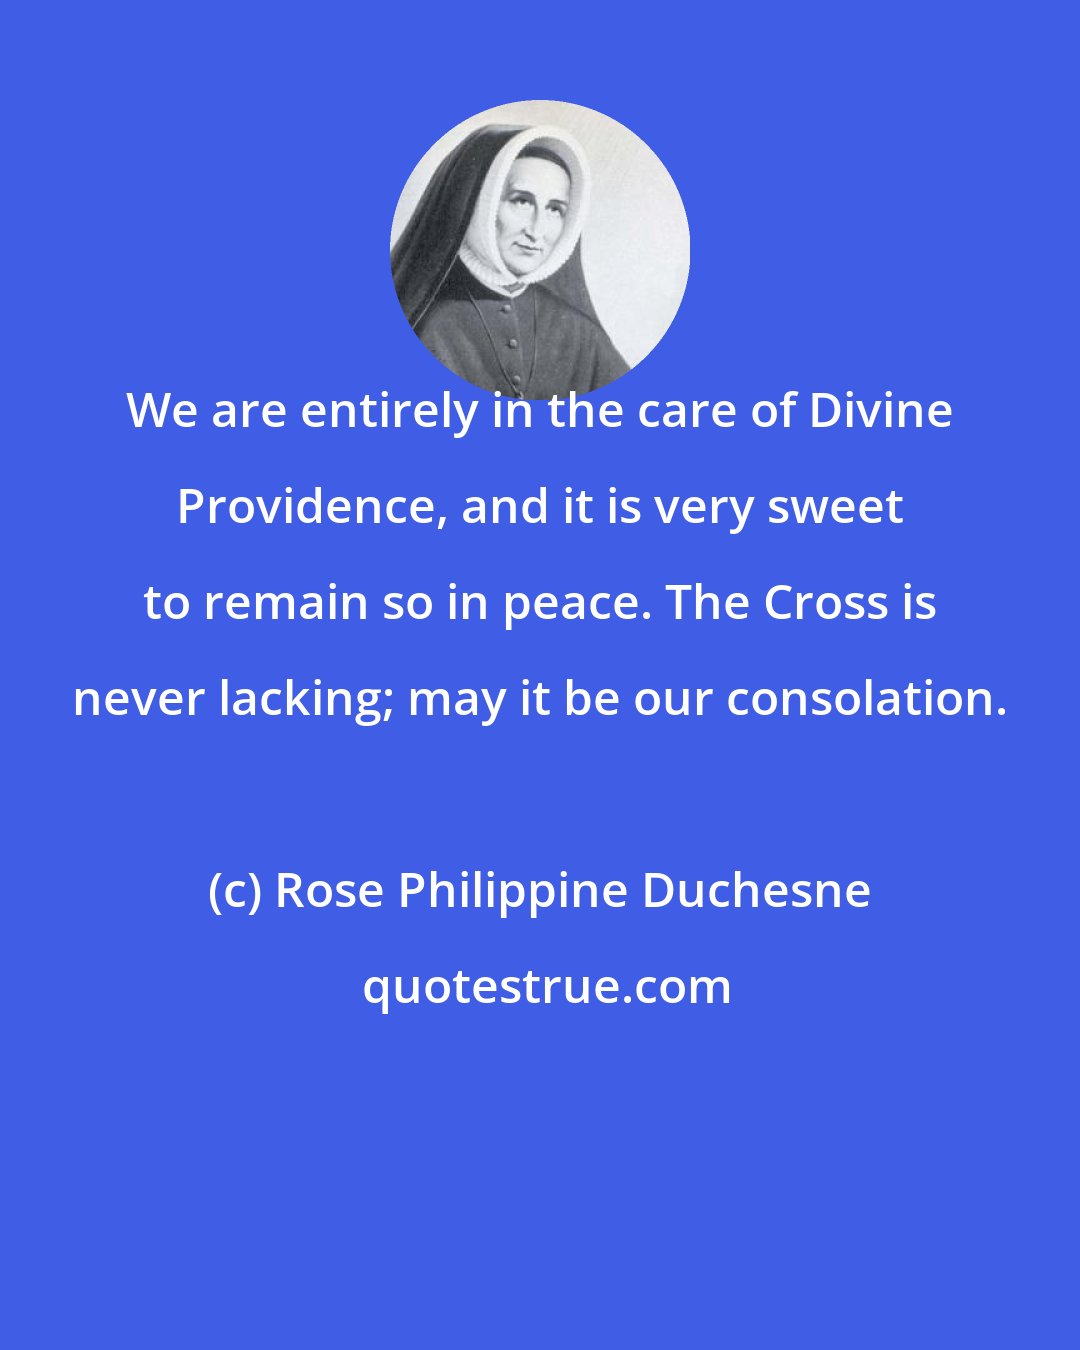 Rose Philippine Duchesne: We are entirely in the care of Divine Providence, and it is very sweet to remain so in peace. The Cross is never lacking; may it be our consolation.